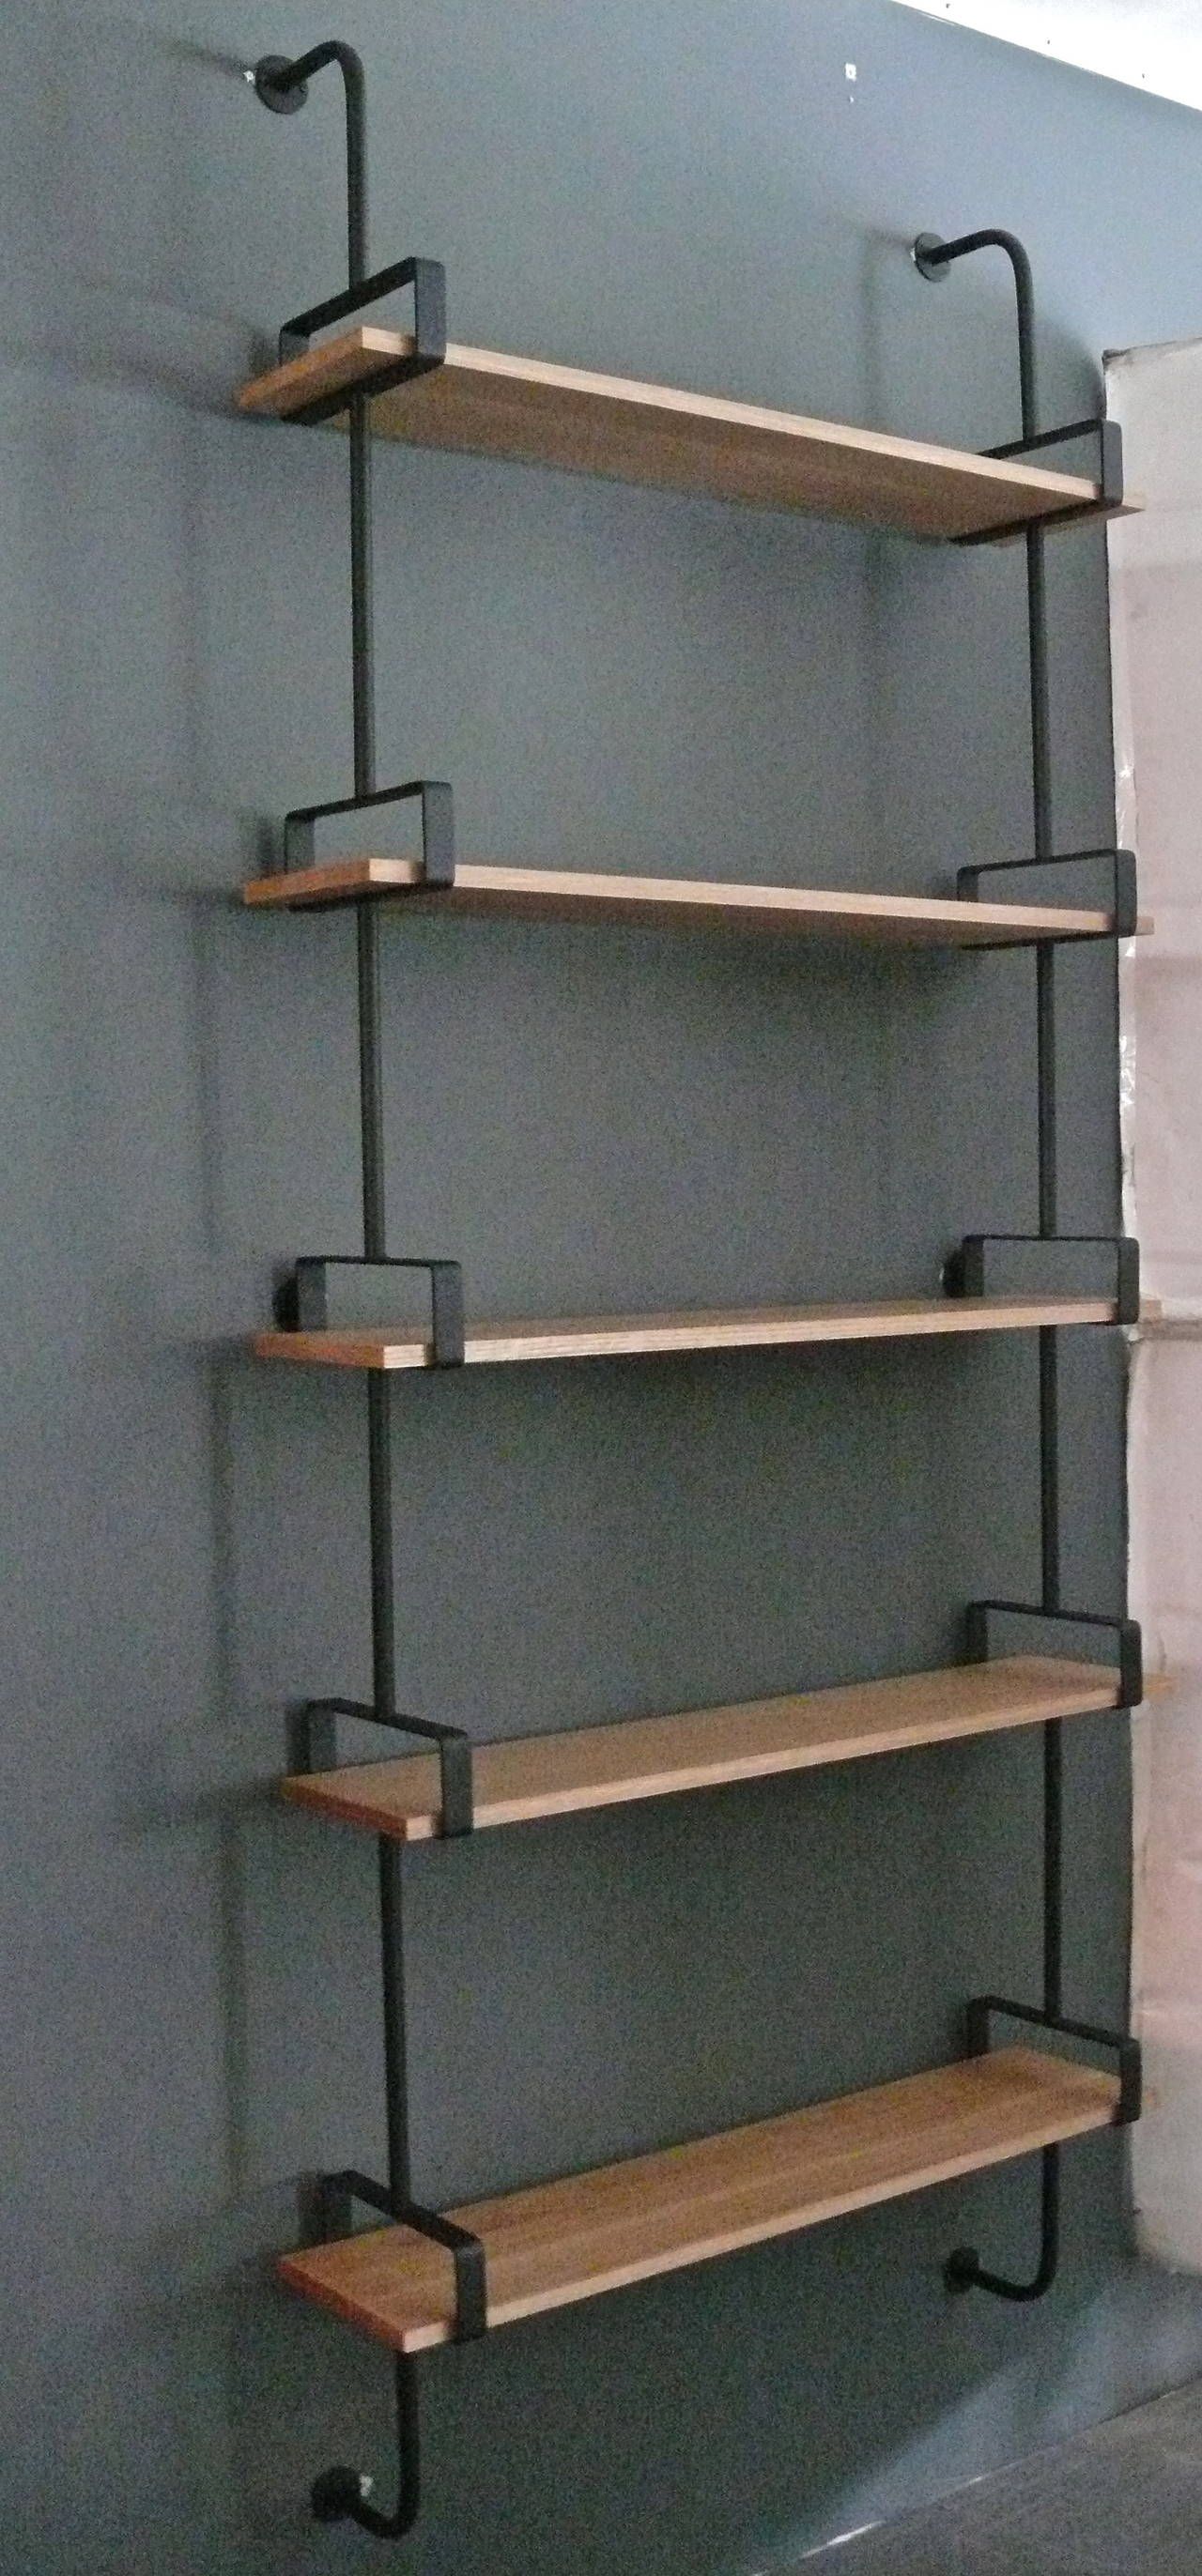 French Iron And Oak Wall Shelves For Sale At 1stdibs Pertaining To Oak Wall Shelves (View 5 of 15)